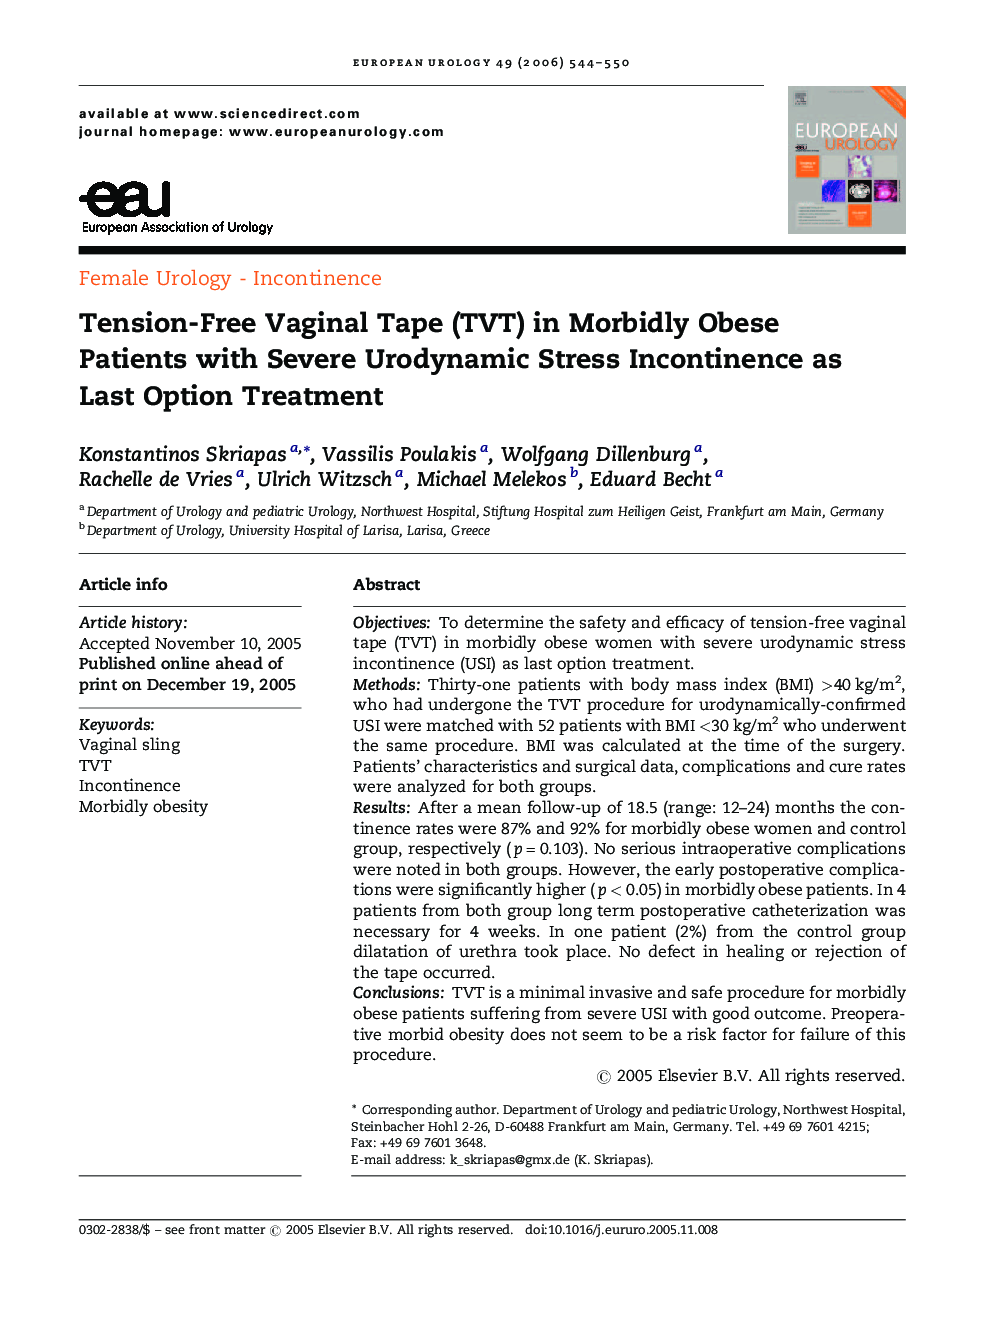 Tension-Free Vaginal Tape (TVT) in Morbidly Obese Patients with Severe Urodynamic Stress Incontinence as Last Option Treatment